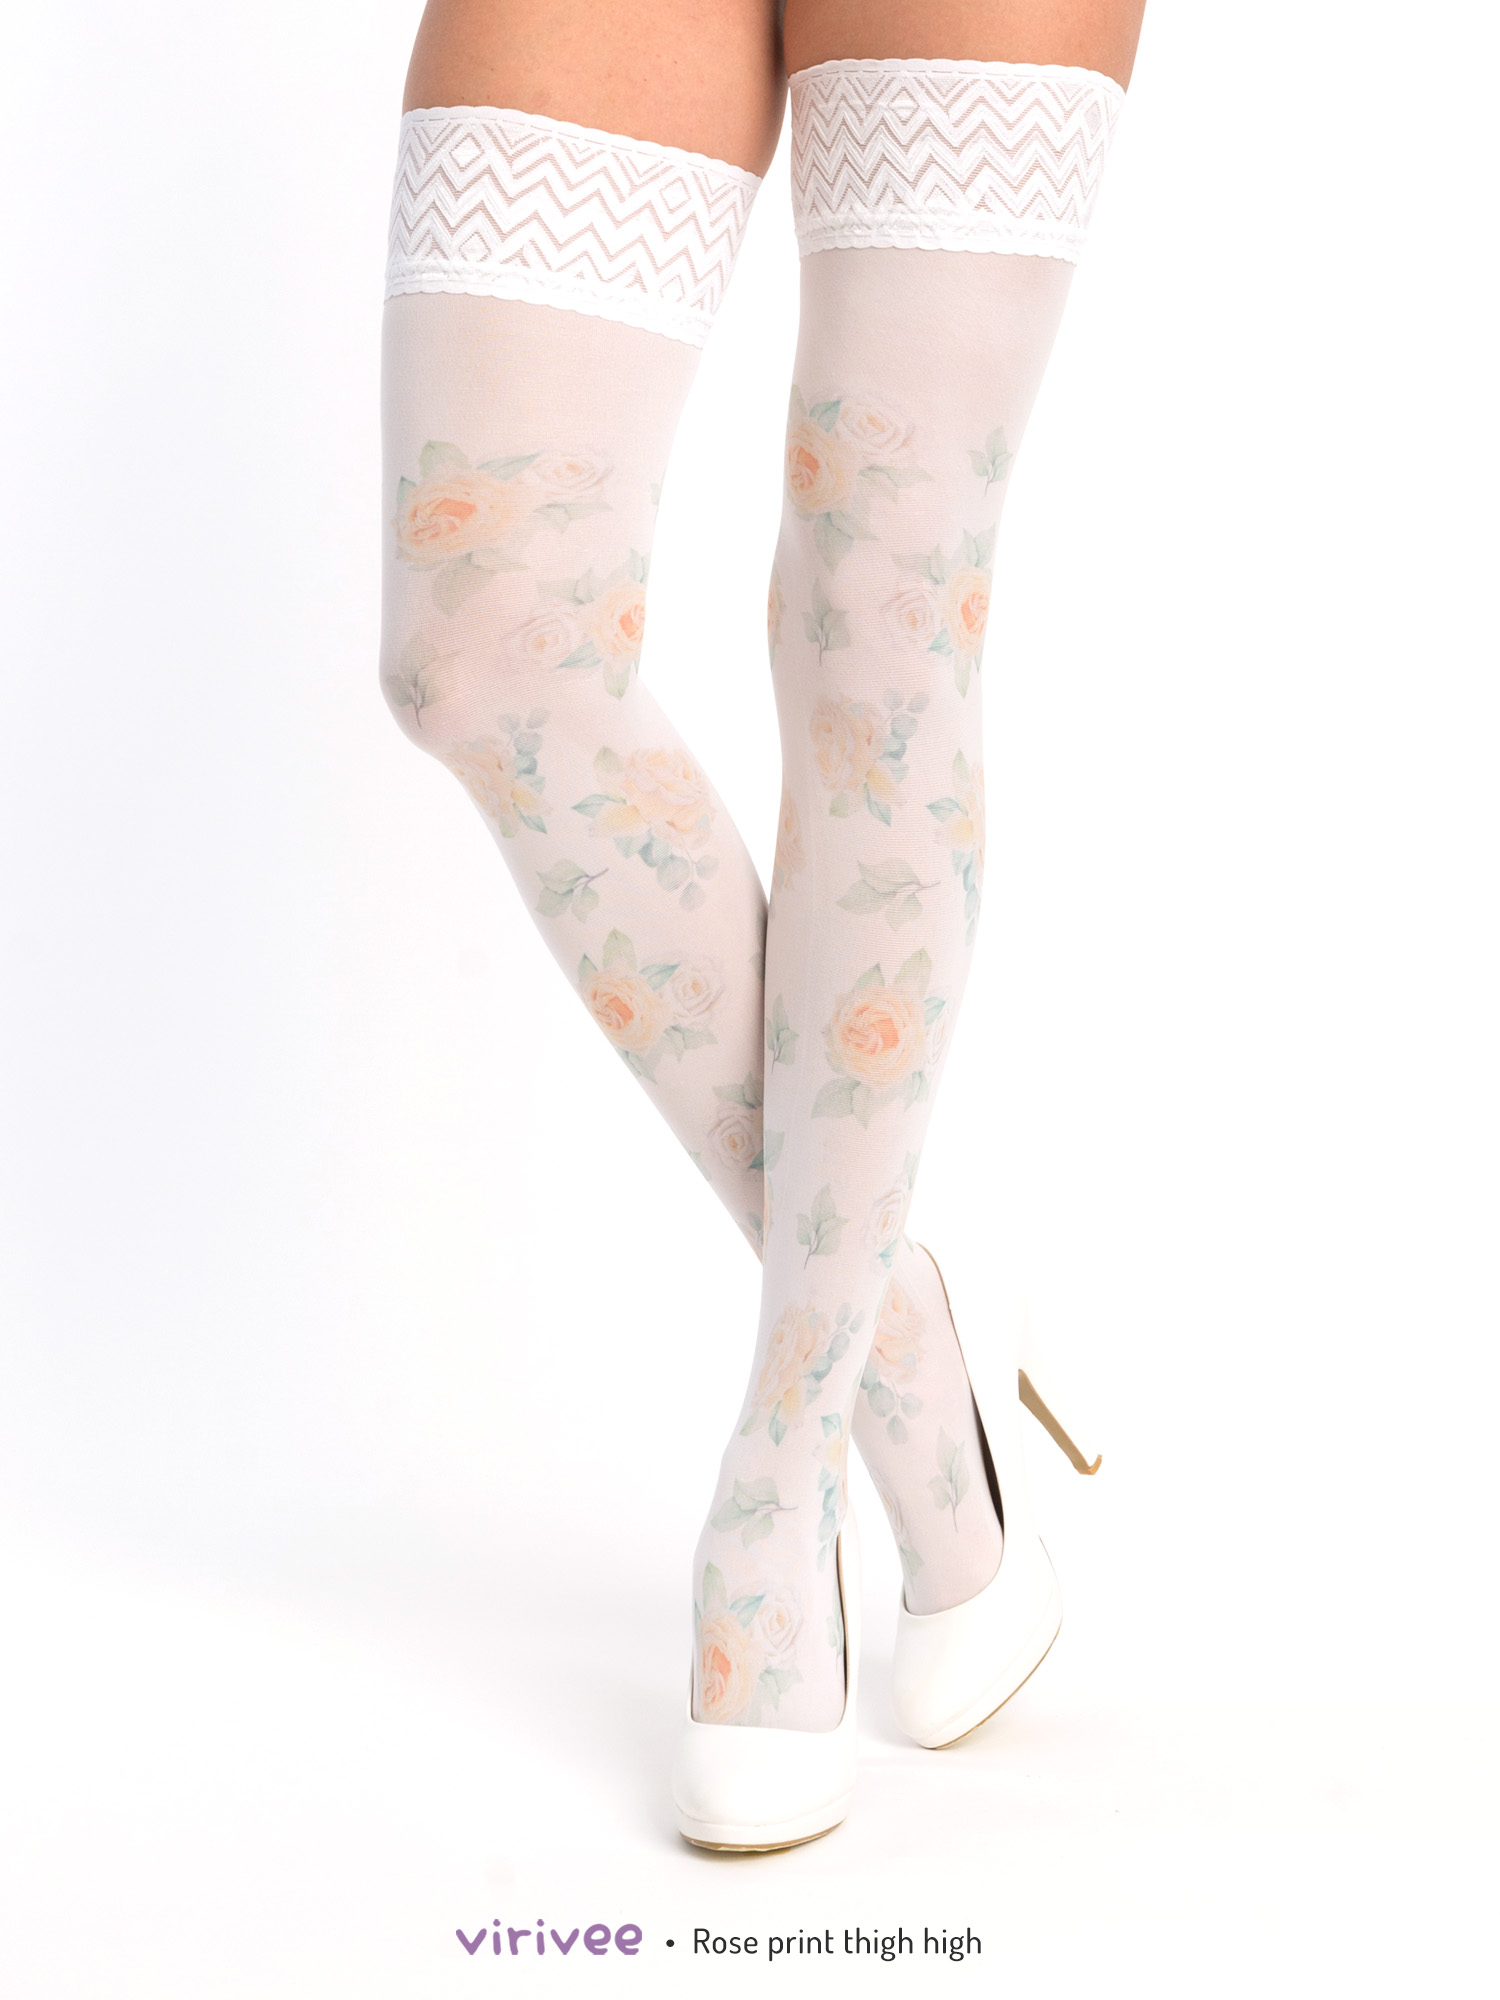 Yellow rose print thigh high stay-up